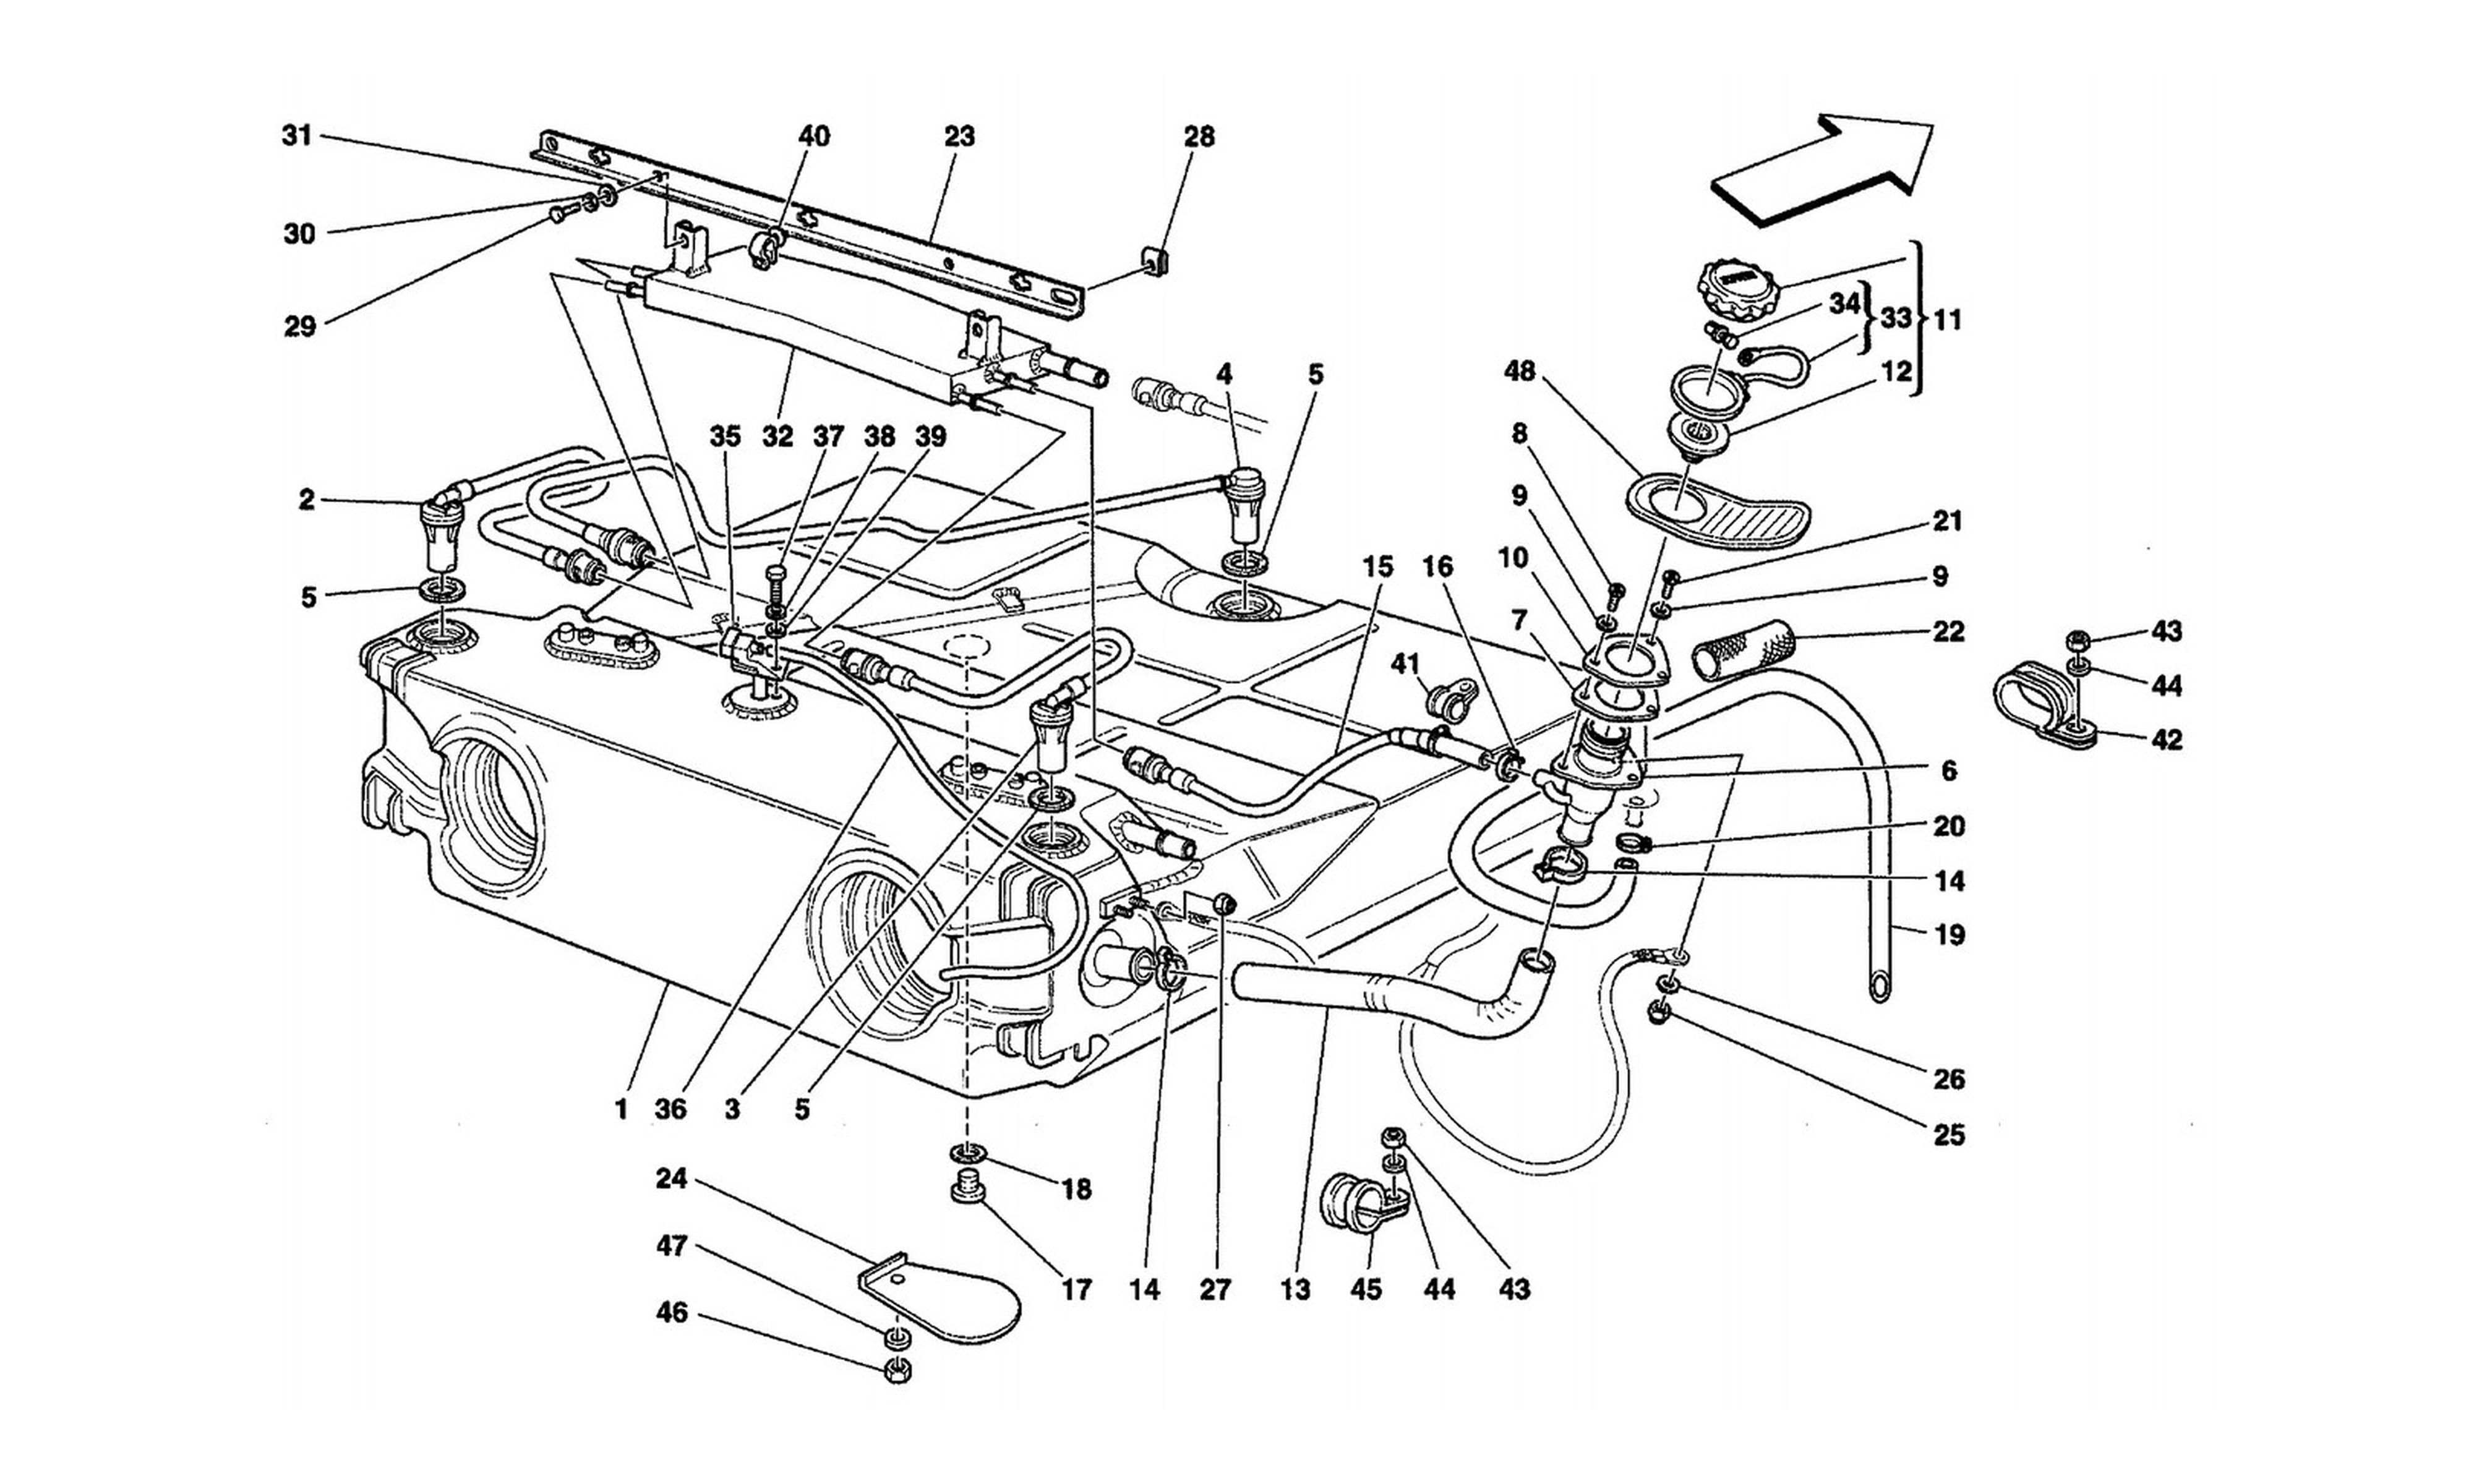 Schematic: Fuel Tank - Union And Piping -Valid For Usa And Cdn